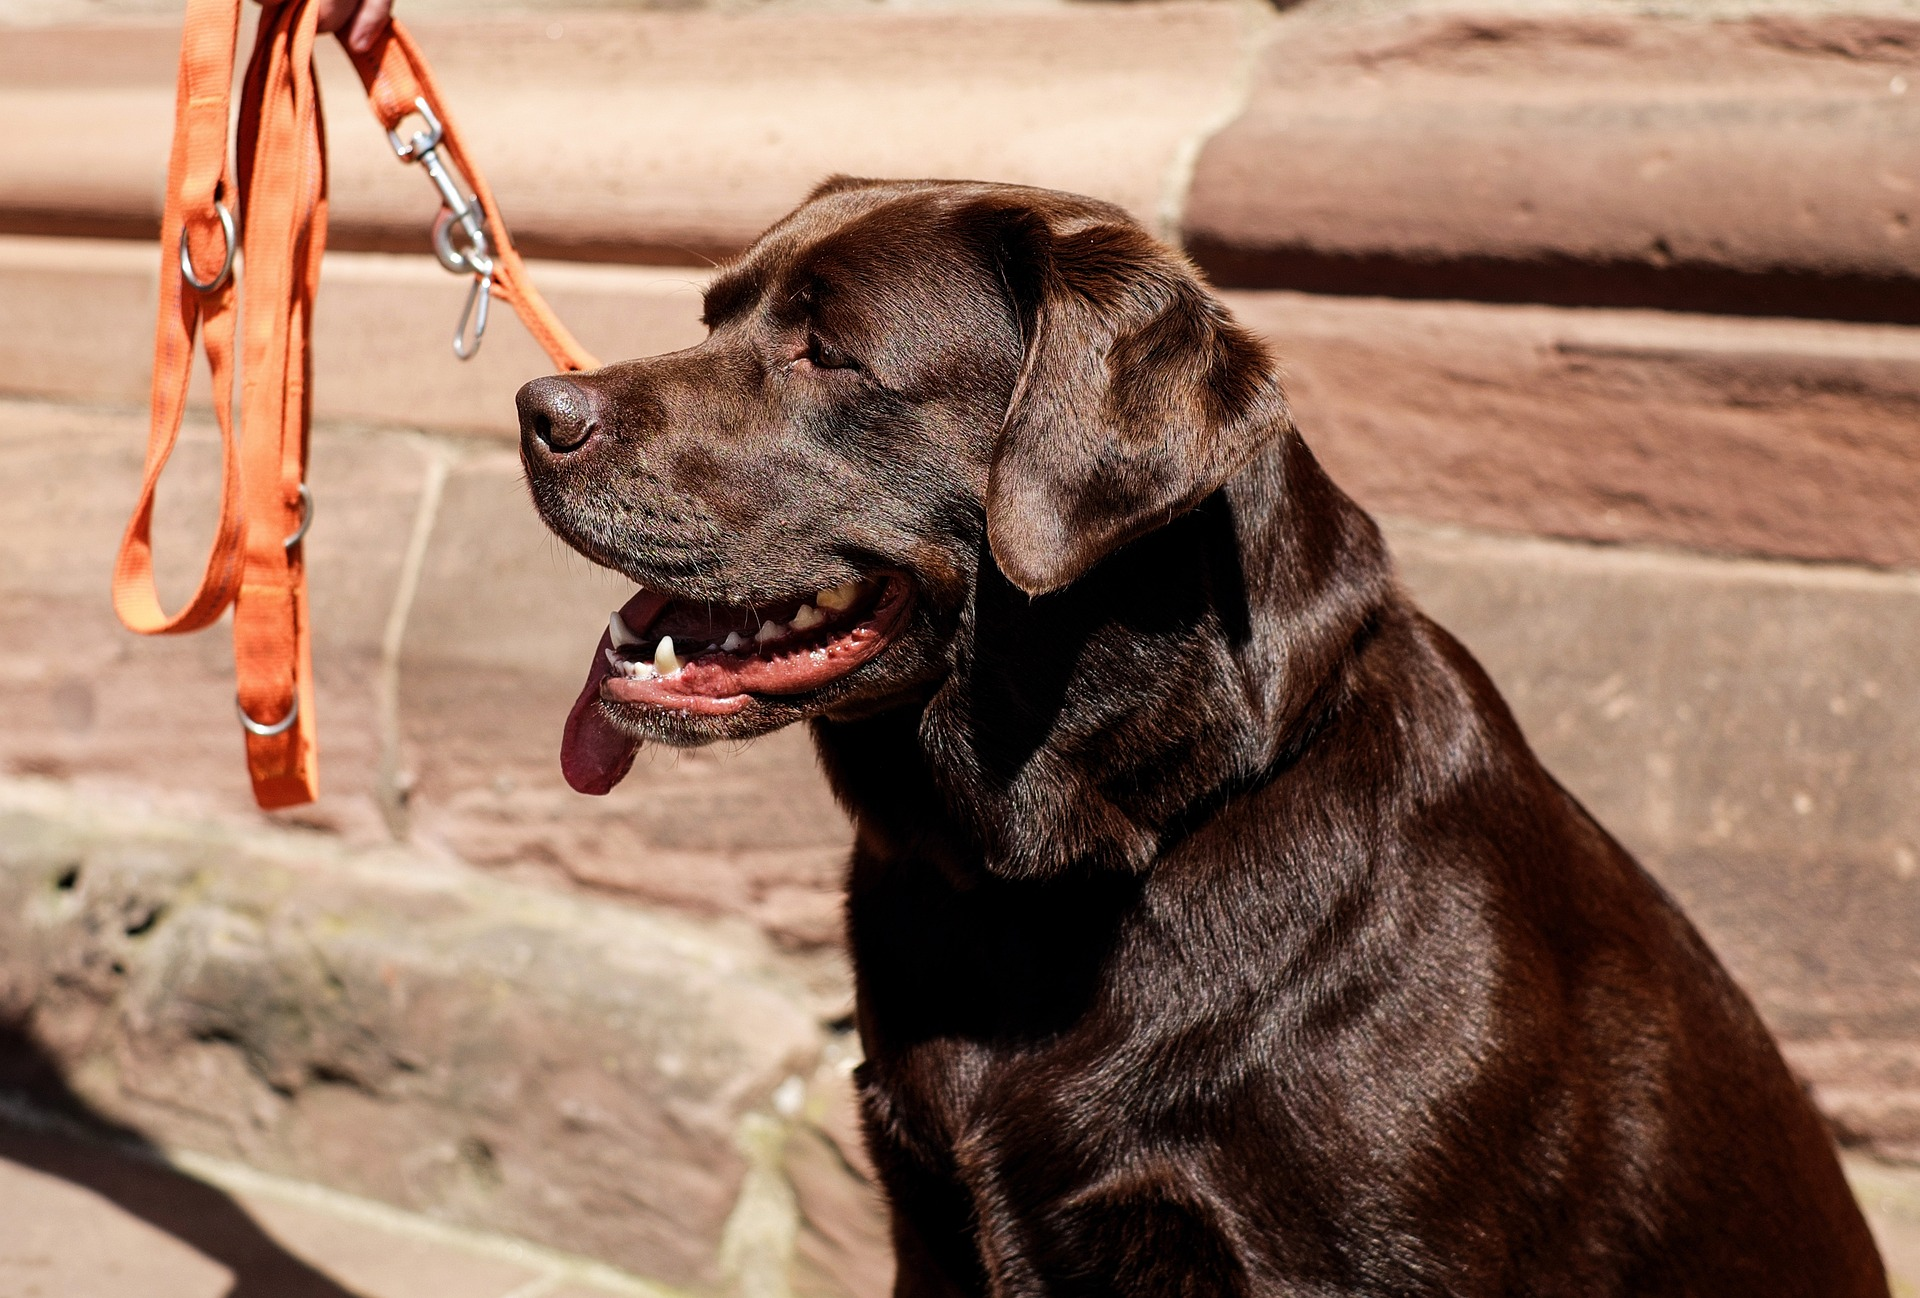 Are labs good guard dogs under normal circumstances?